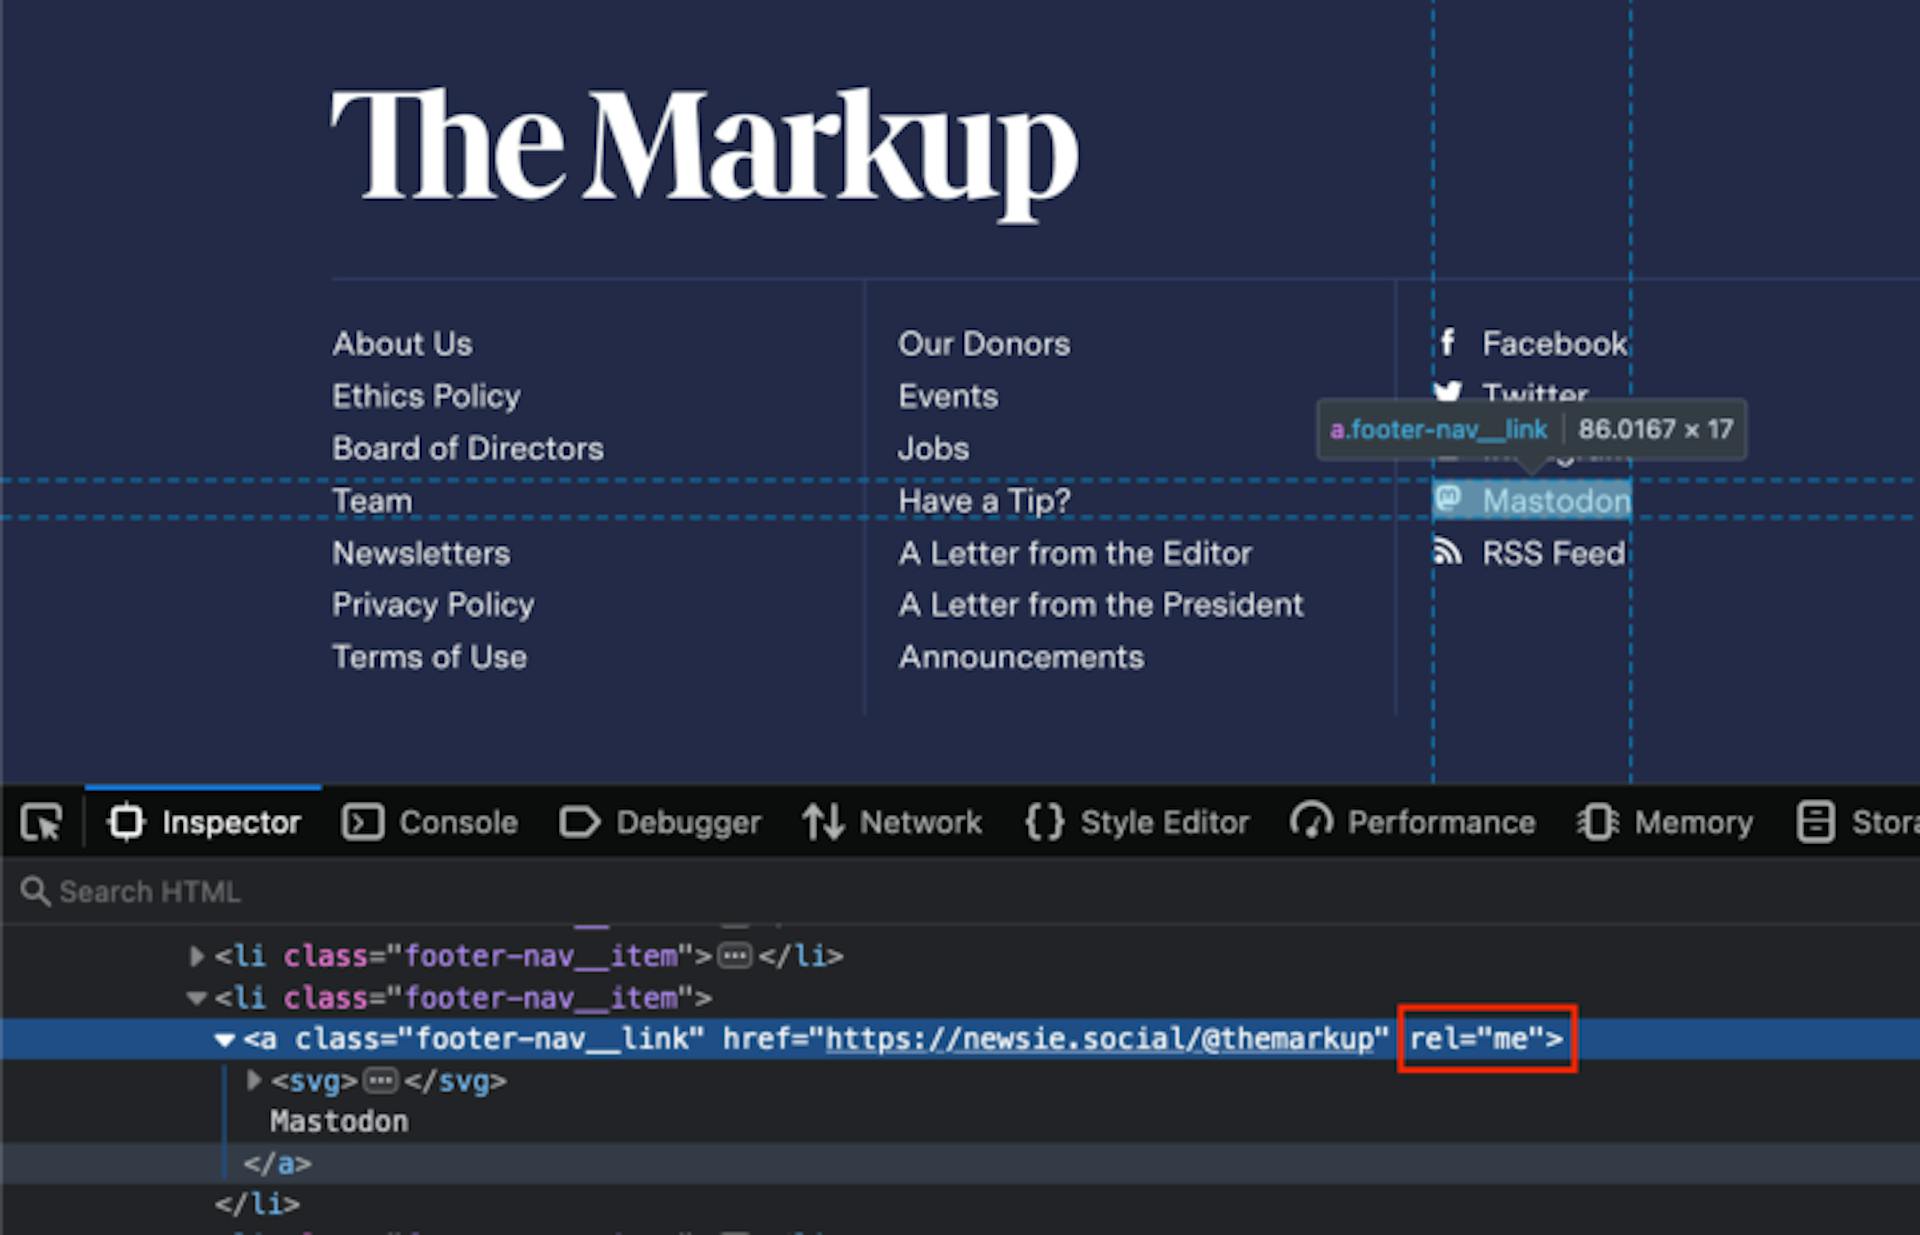 A web inspector view of themarkup.org footer links, including the rel="me" attribute on the link to our Mastodon profile page.